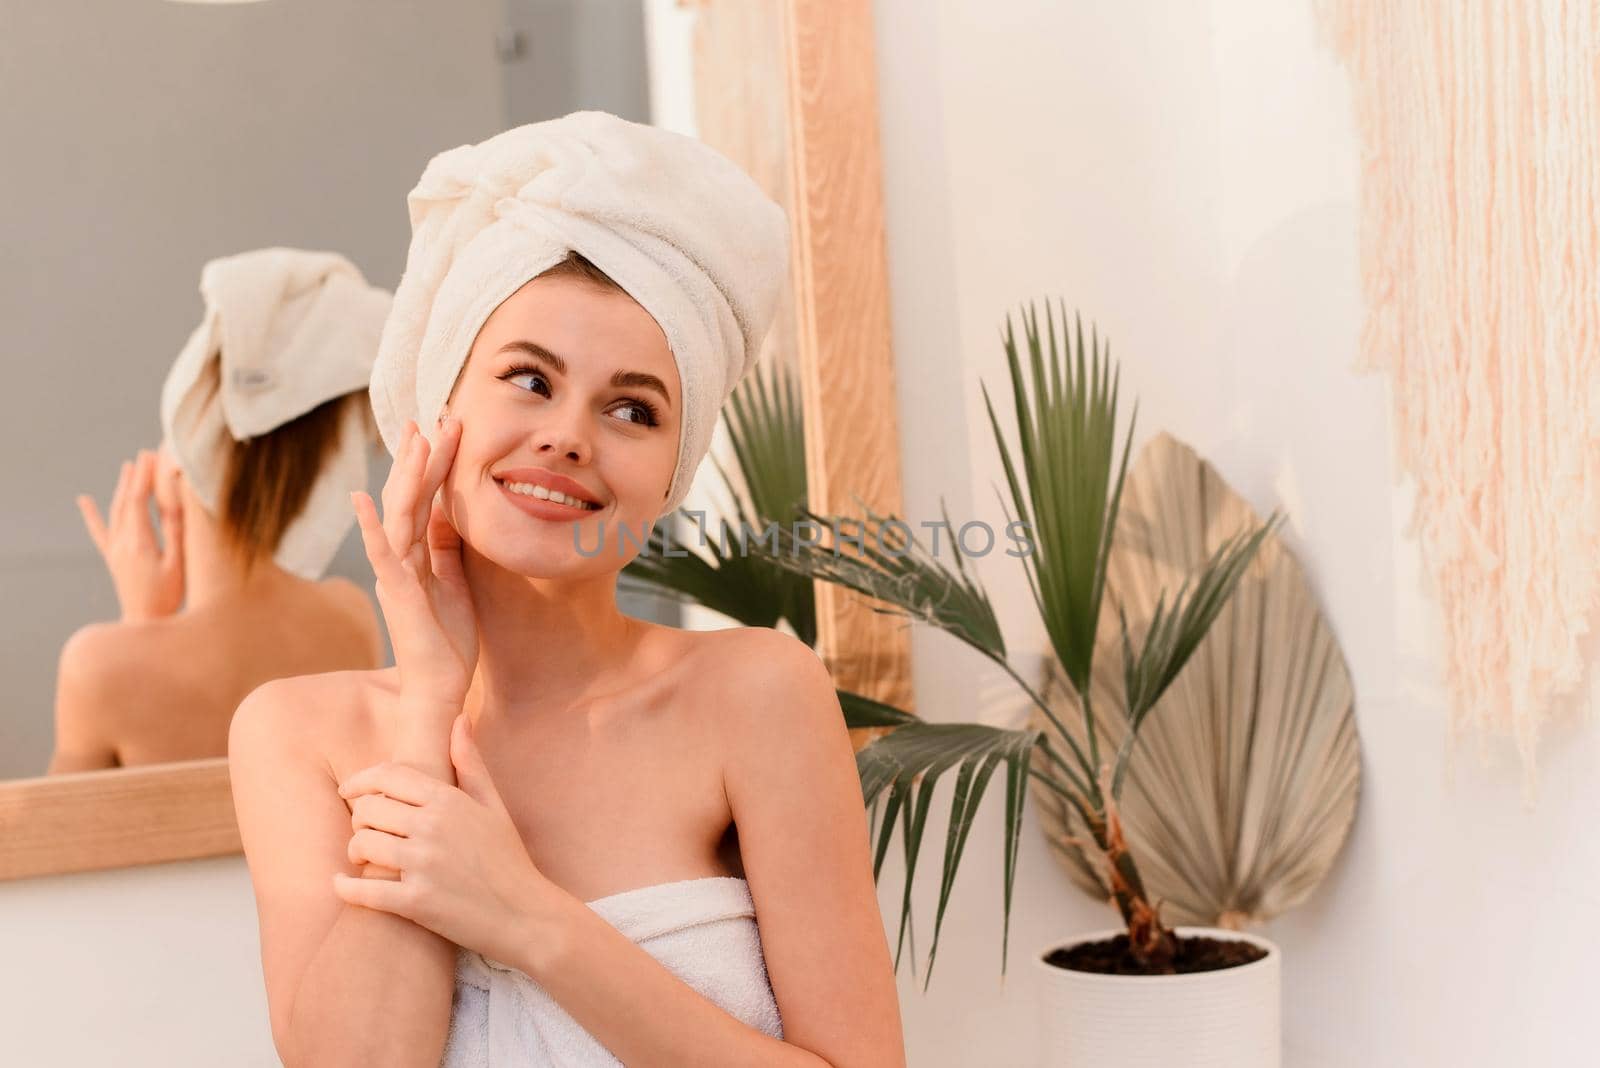 Young smiling woman smiling after spa treatments in bathroom.